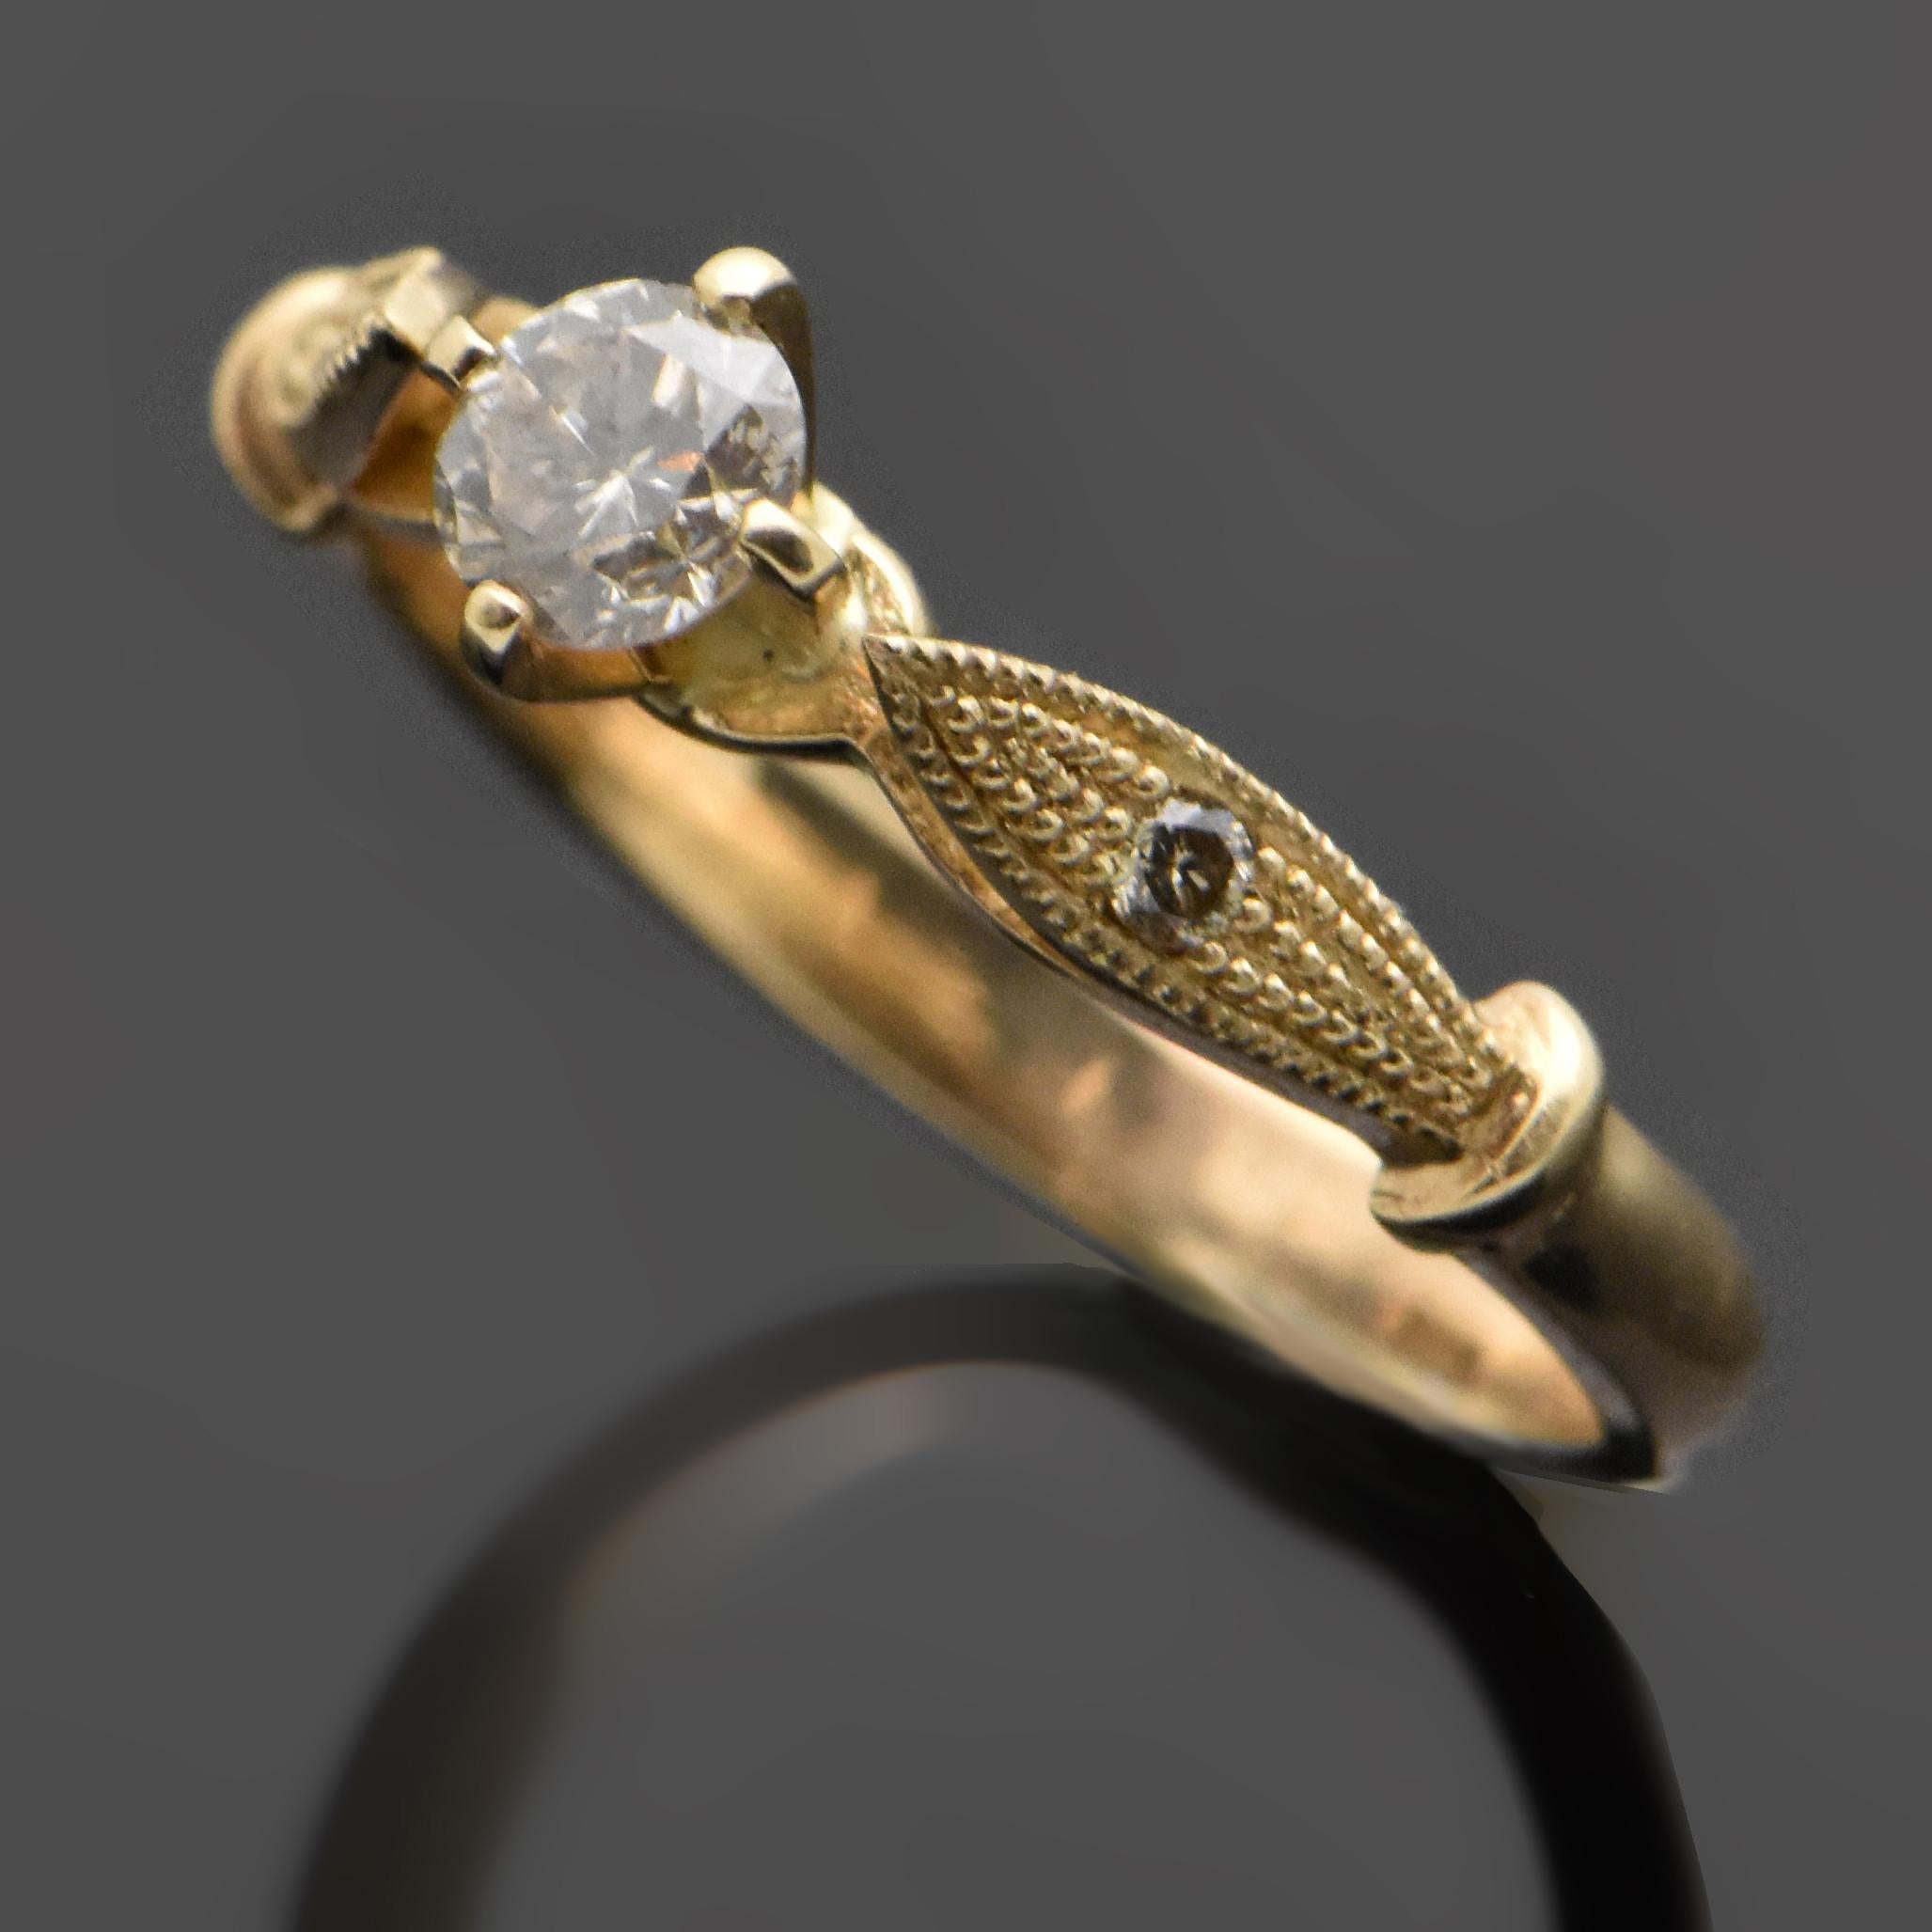 A 14kt yellow gold ring featuring a diamond estimated at 0.30ct. The shoulders are raised into a leaf-like design with beautiful milgran details and diamond accents.   Estimated weight of gold is 2 gr. 

We will size it for you.

